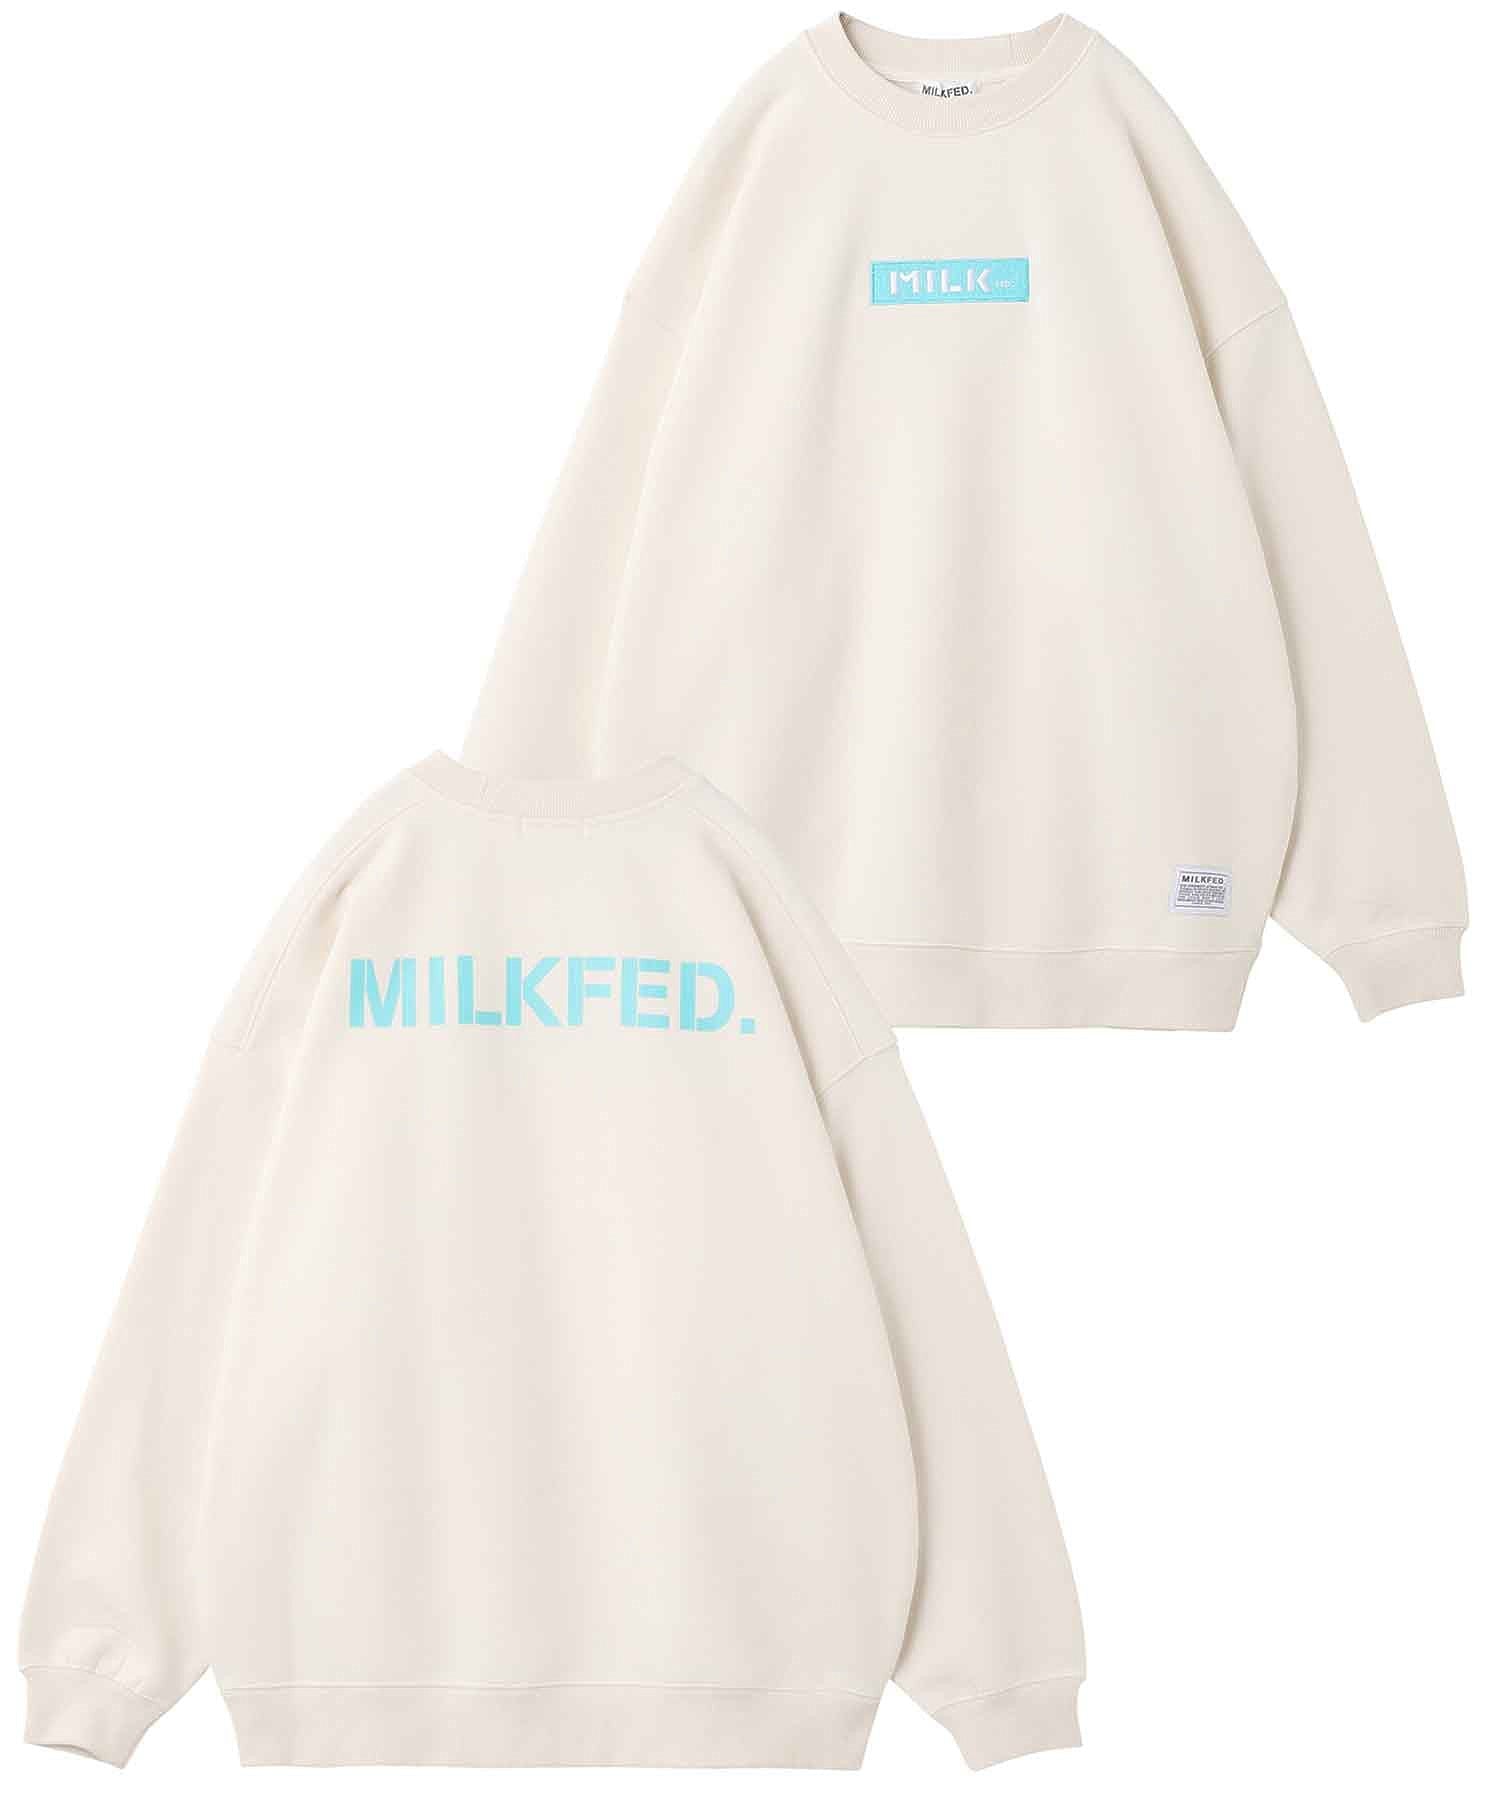 EMBROIDERED BAR BIG SWEAT TOP LIMITED COLOR MILKFED.